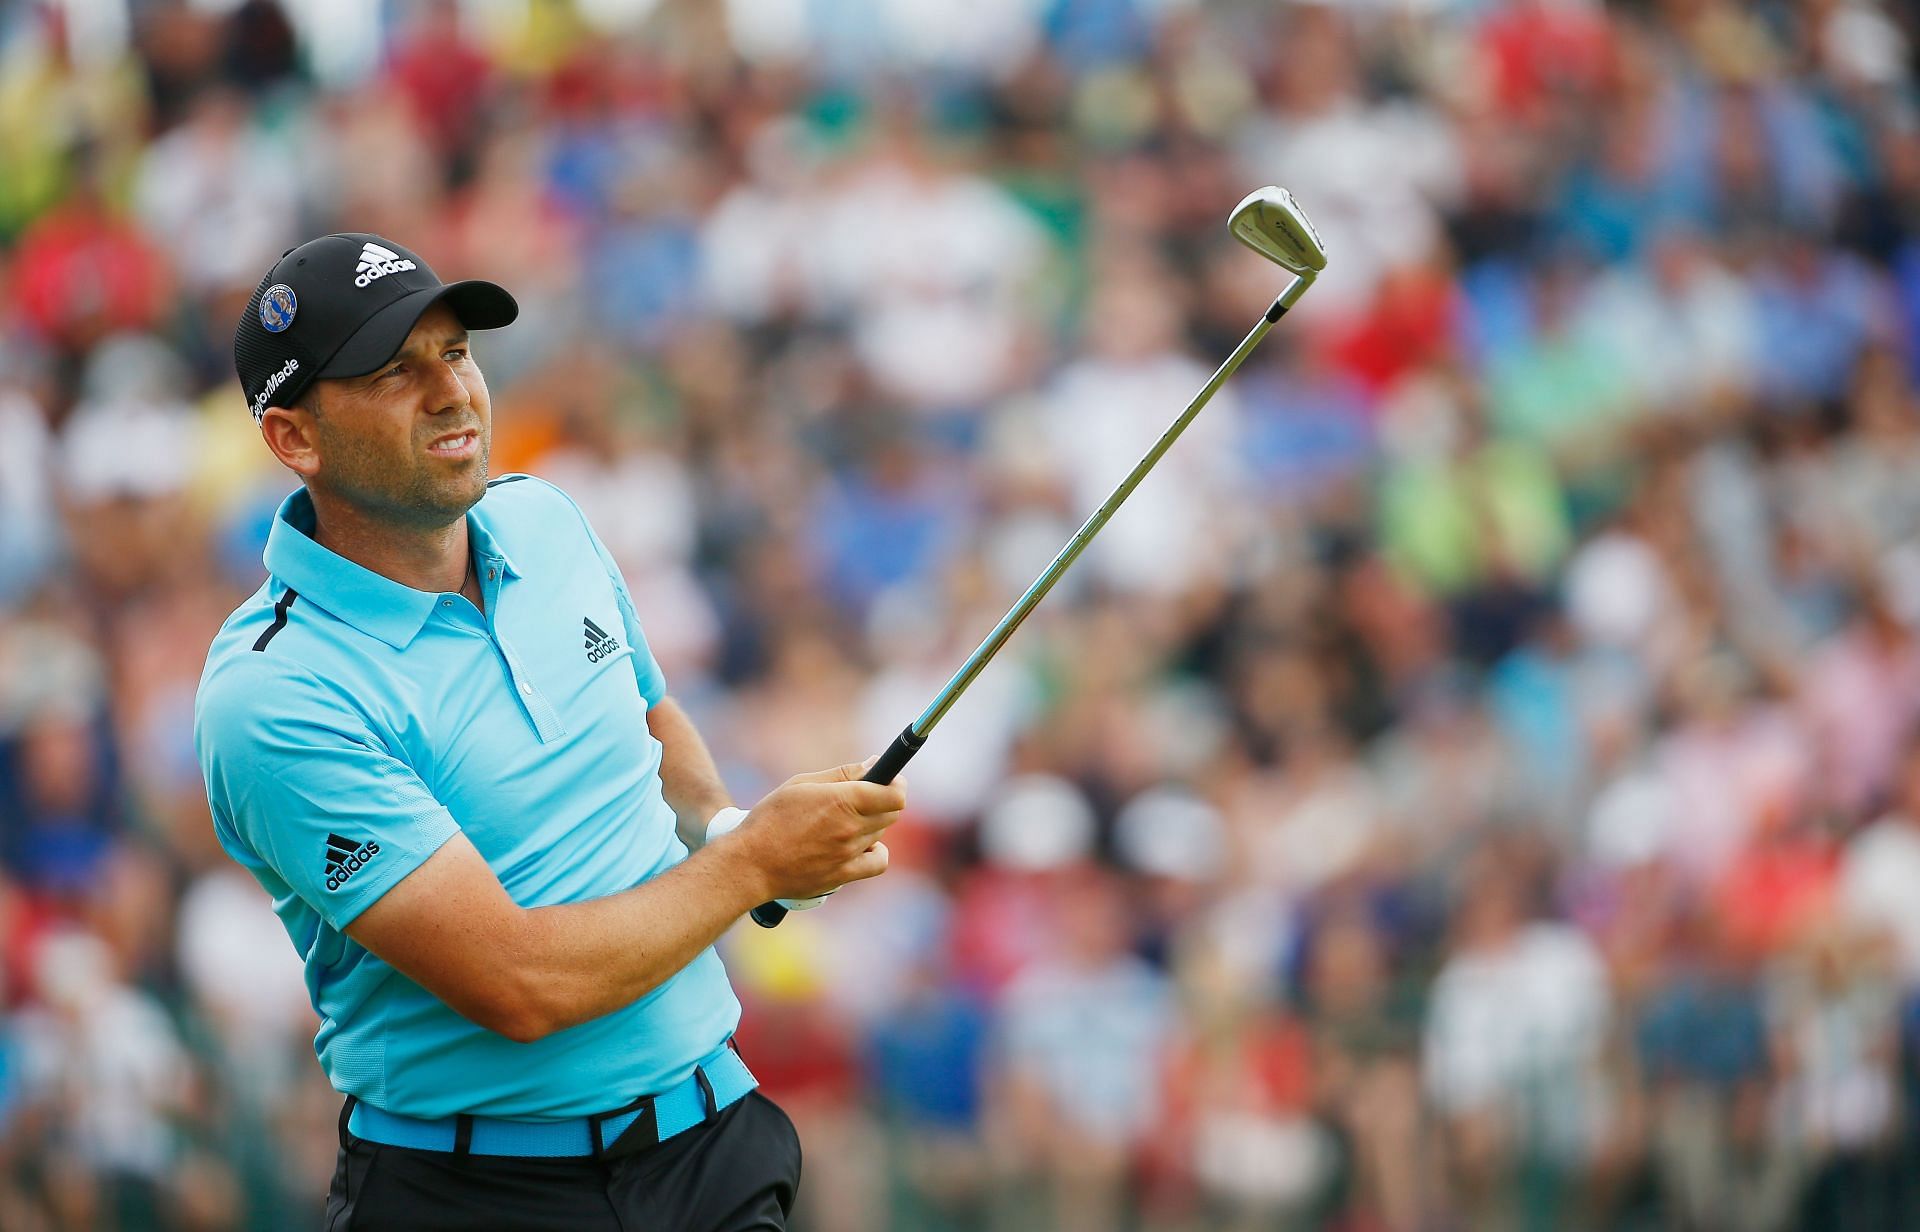 Sergio Garcia at the 143rd Open Championship 2014 (via Getty Images)